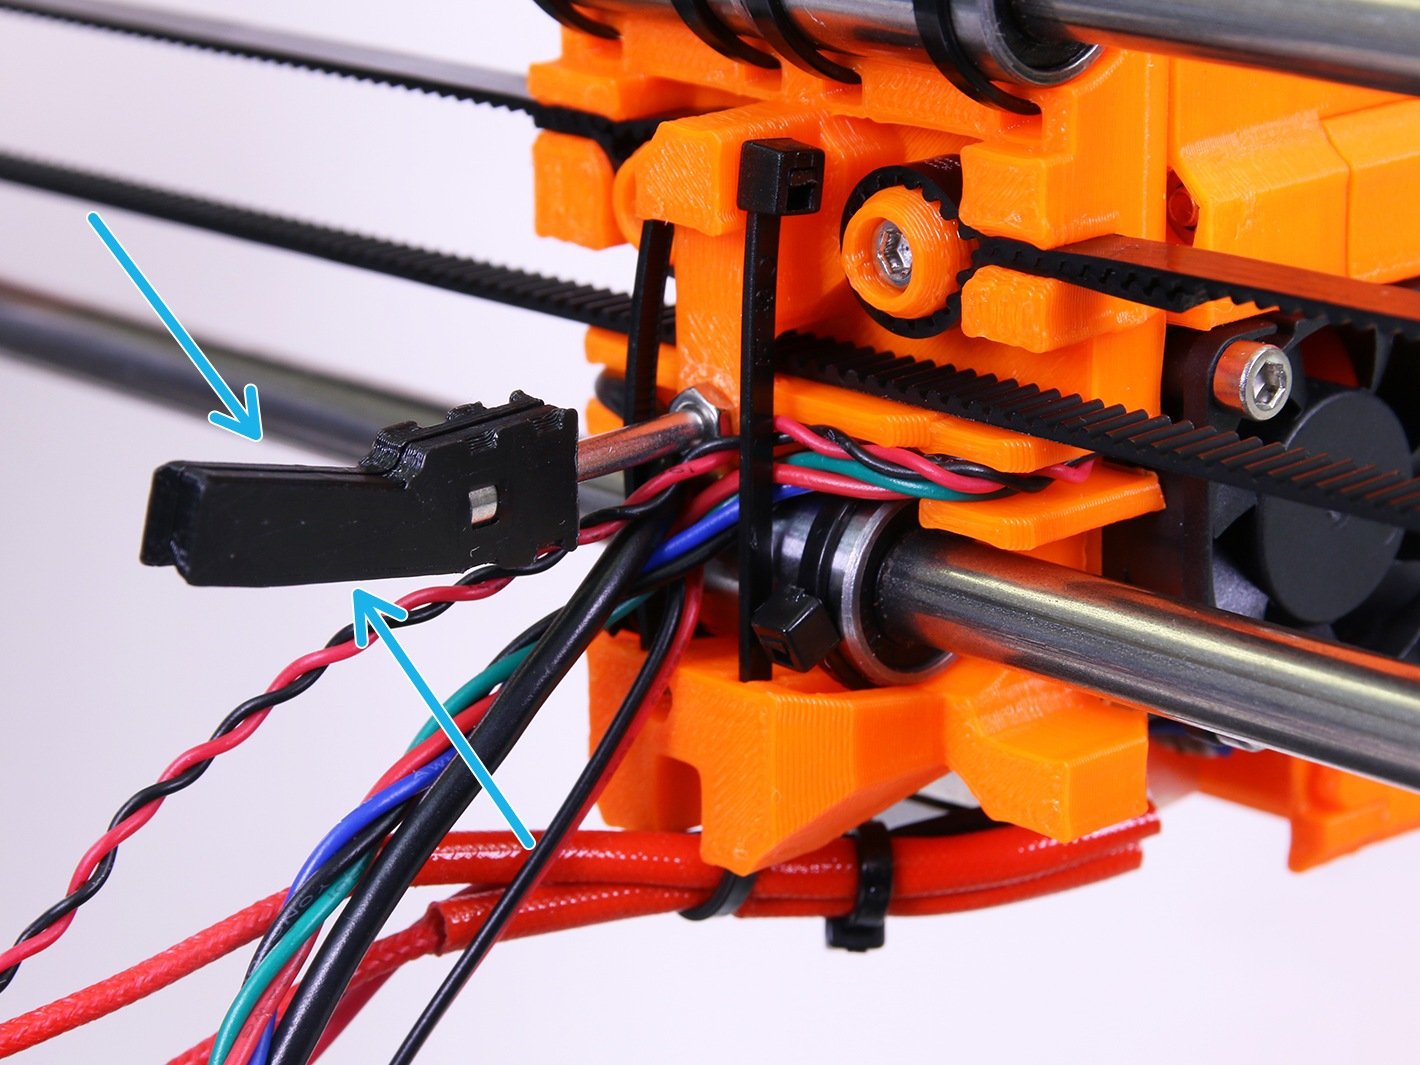 Attachment of the Extruder cable holder